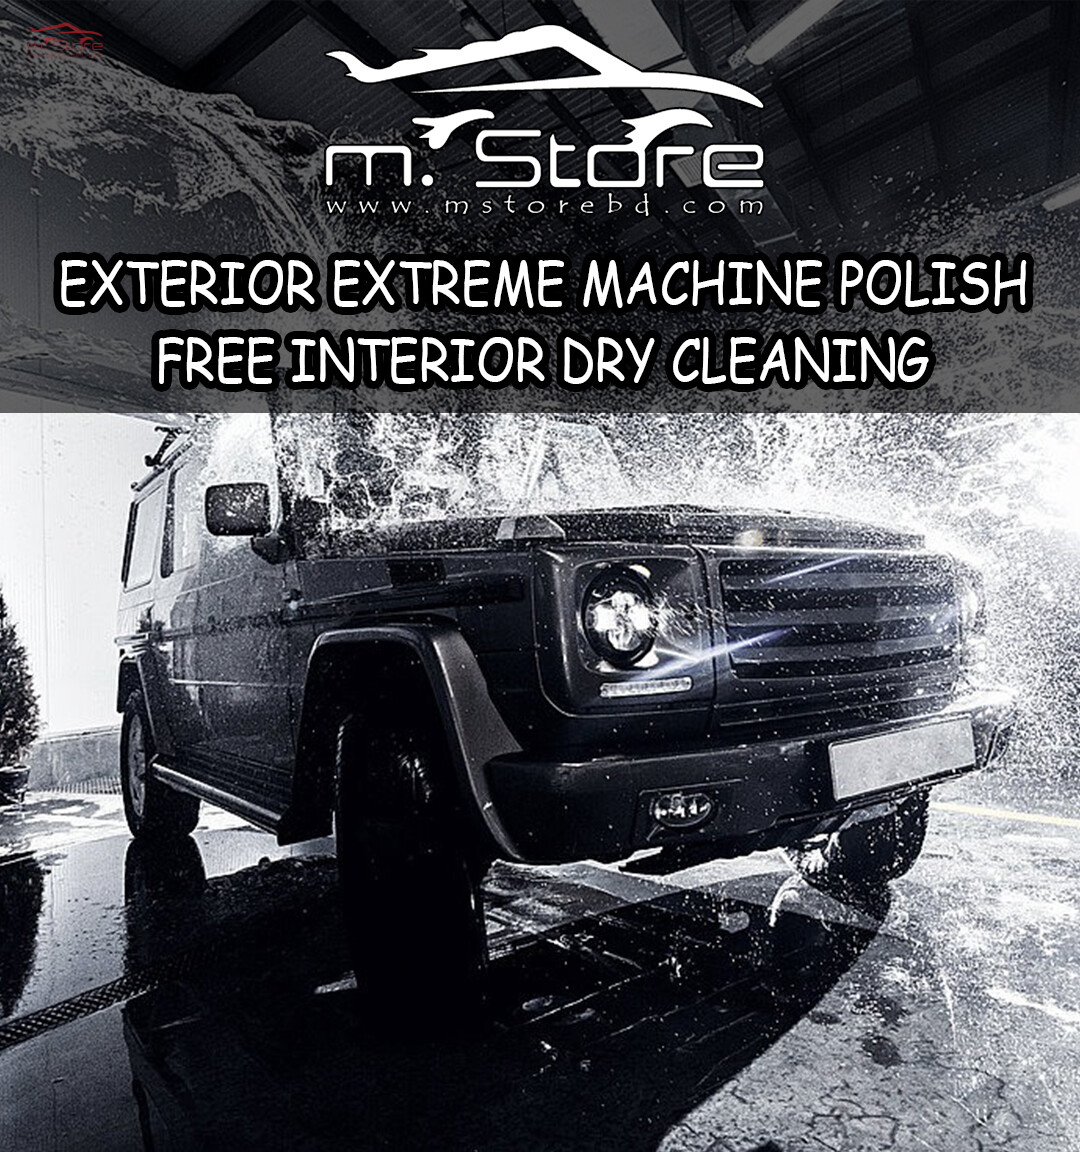 EXTERIOR EXTREME MACHINE POLISH WITH FREE INTERIOR CLEANING